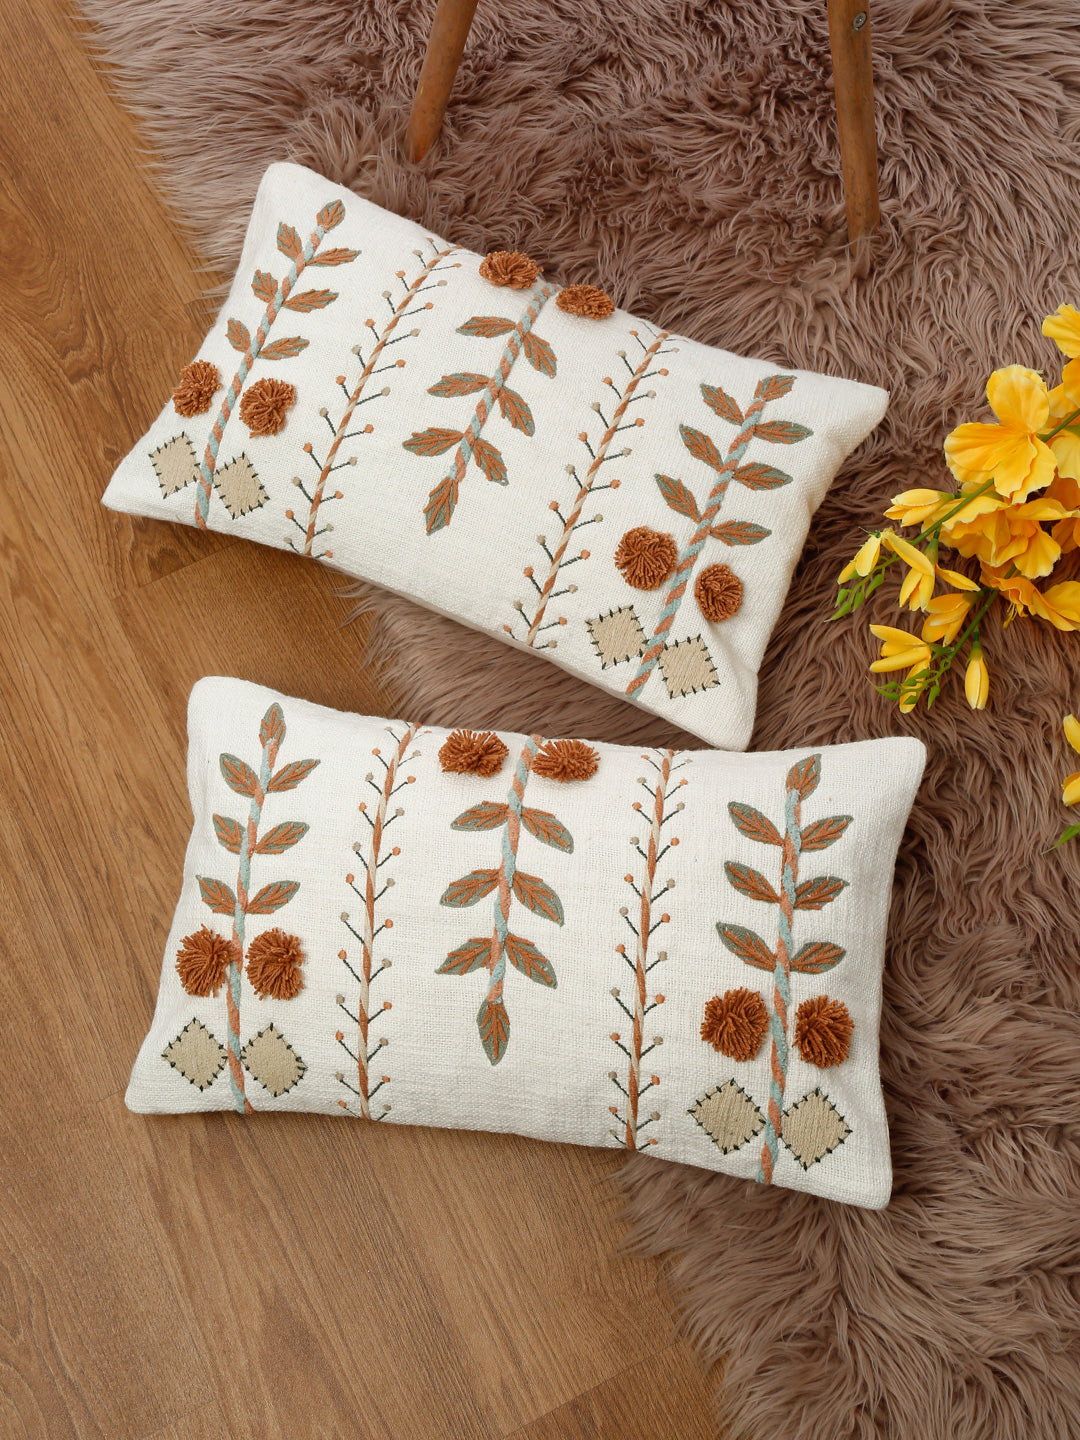 Set of 2 White & Rust Cotton Embroidered Square Cushion Covers